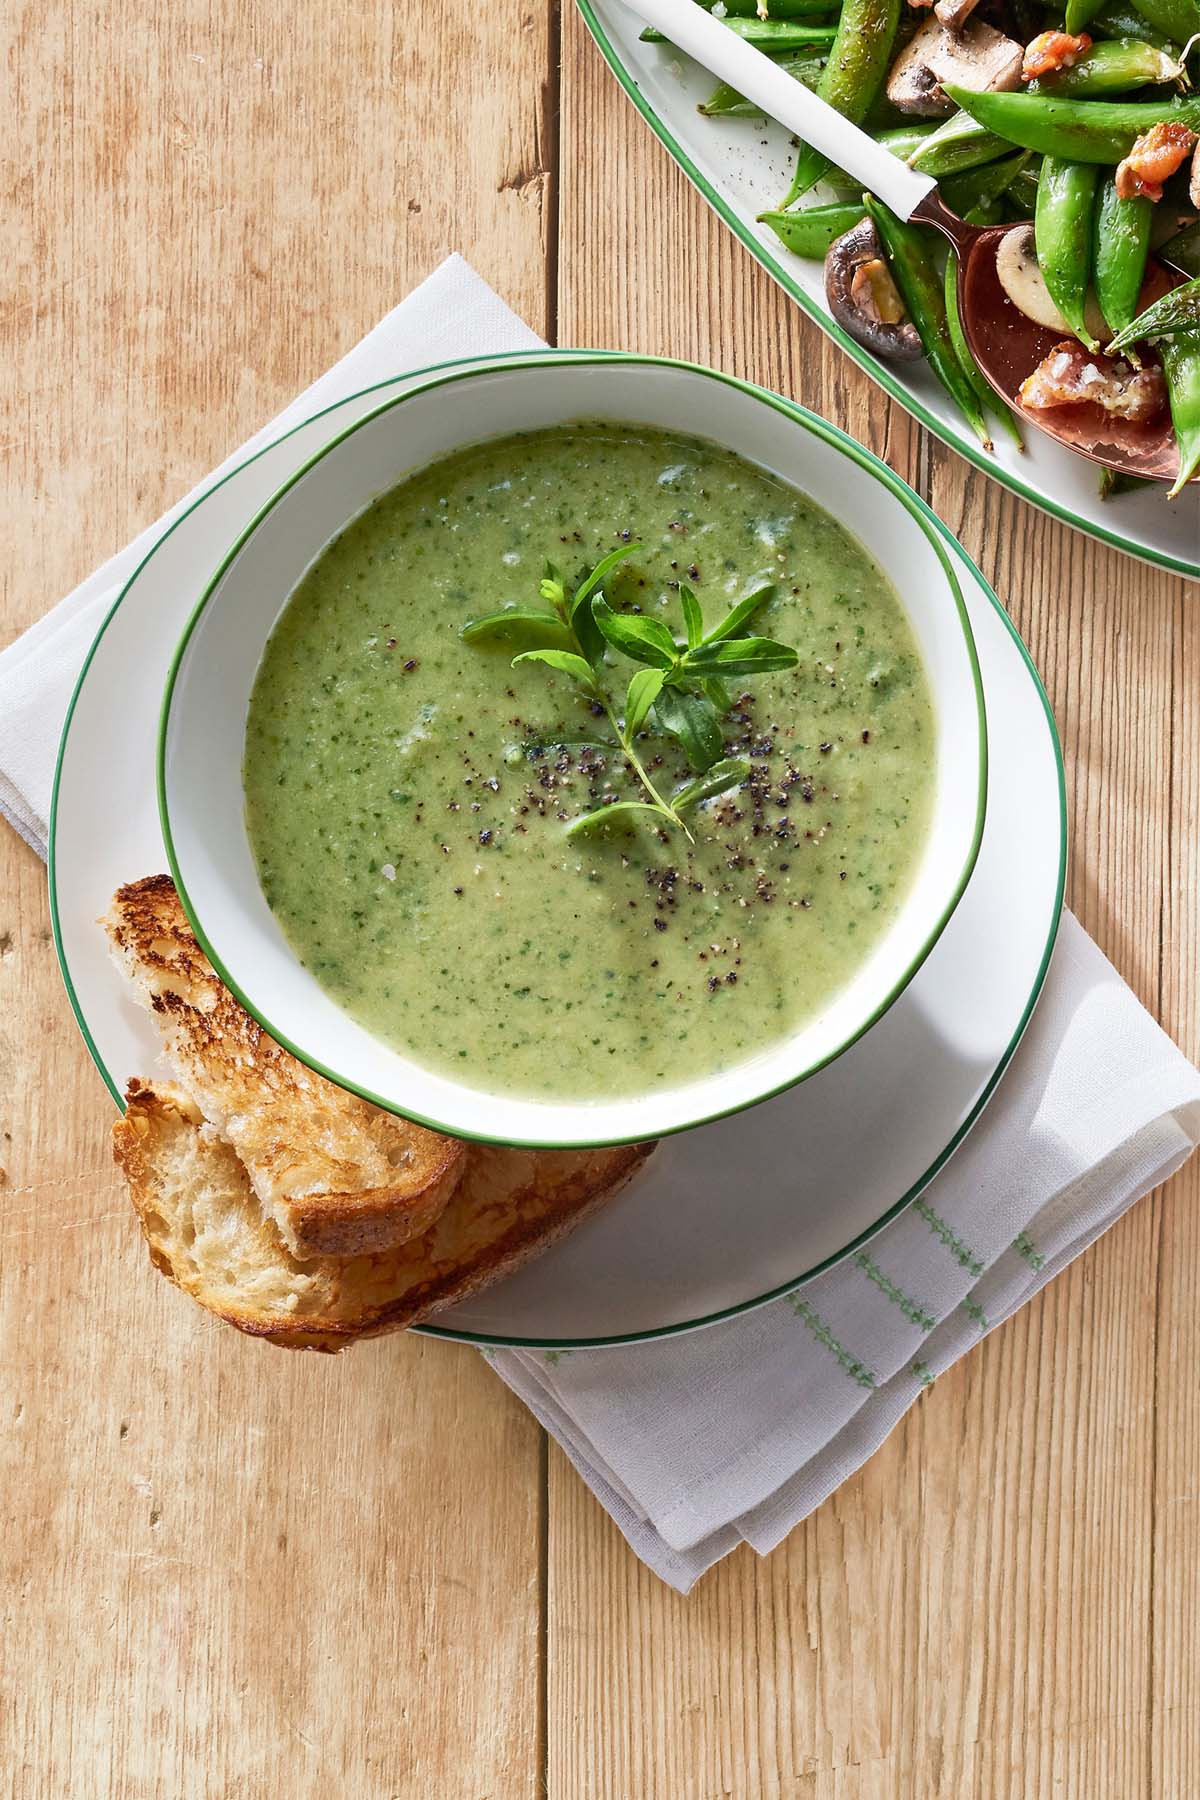 Healthy Soups To Make
 48 Best Healthy Soup Recipes Quick & Easy Low Calorie Soups